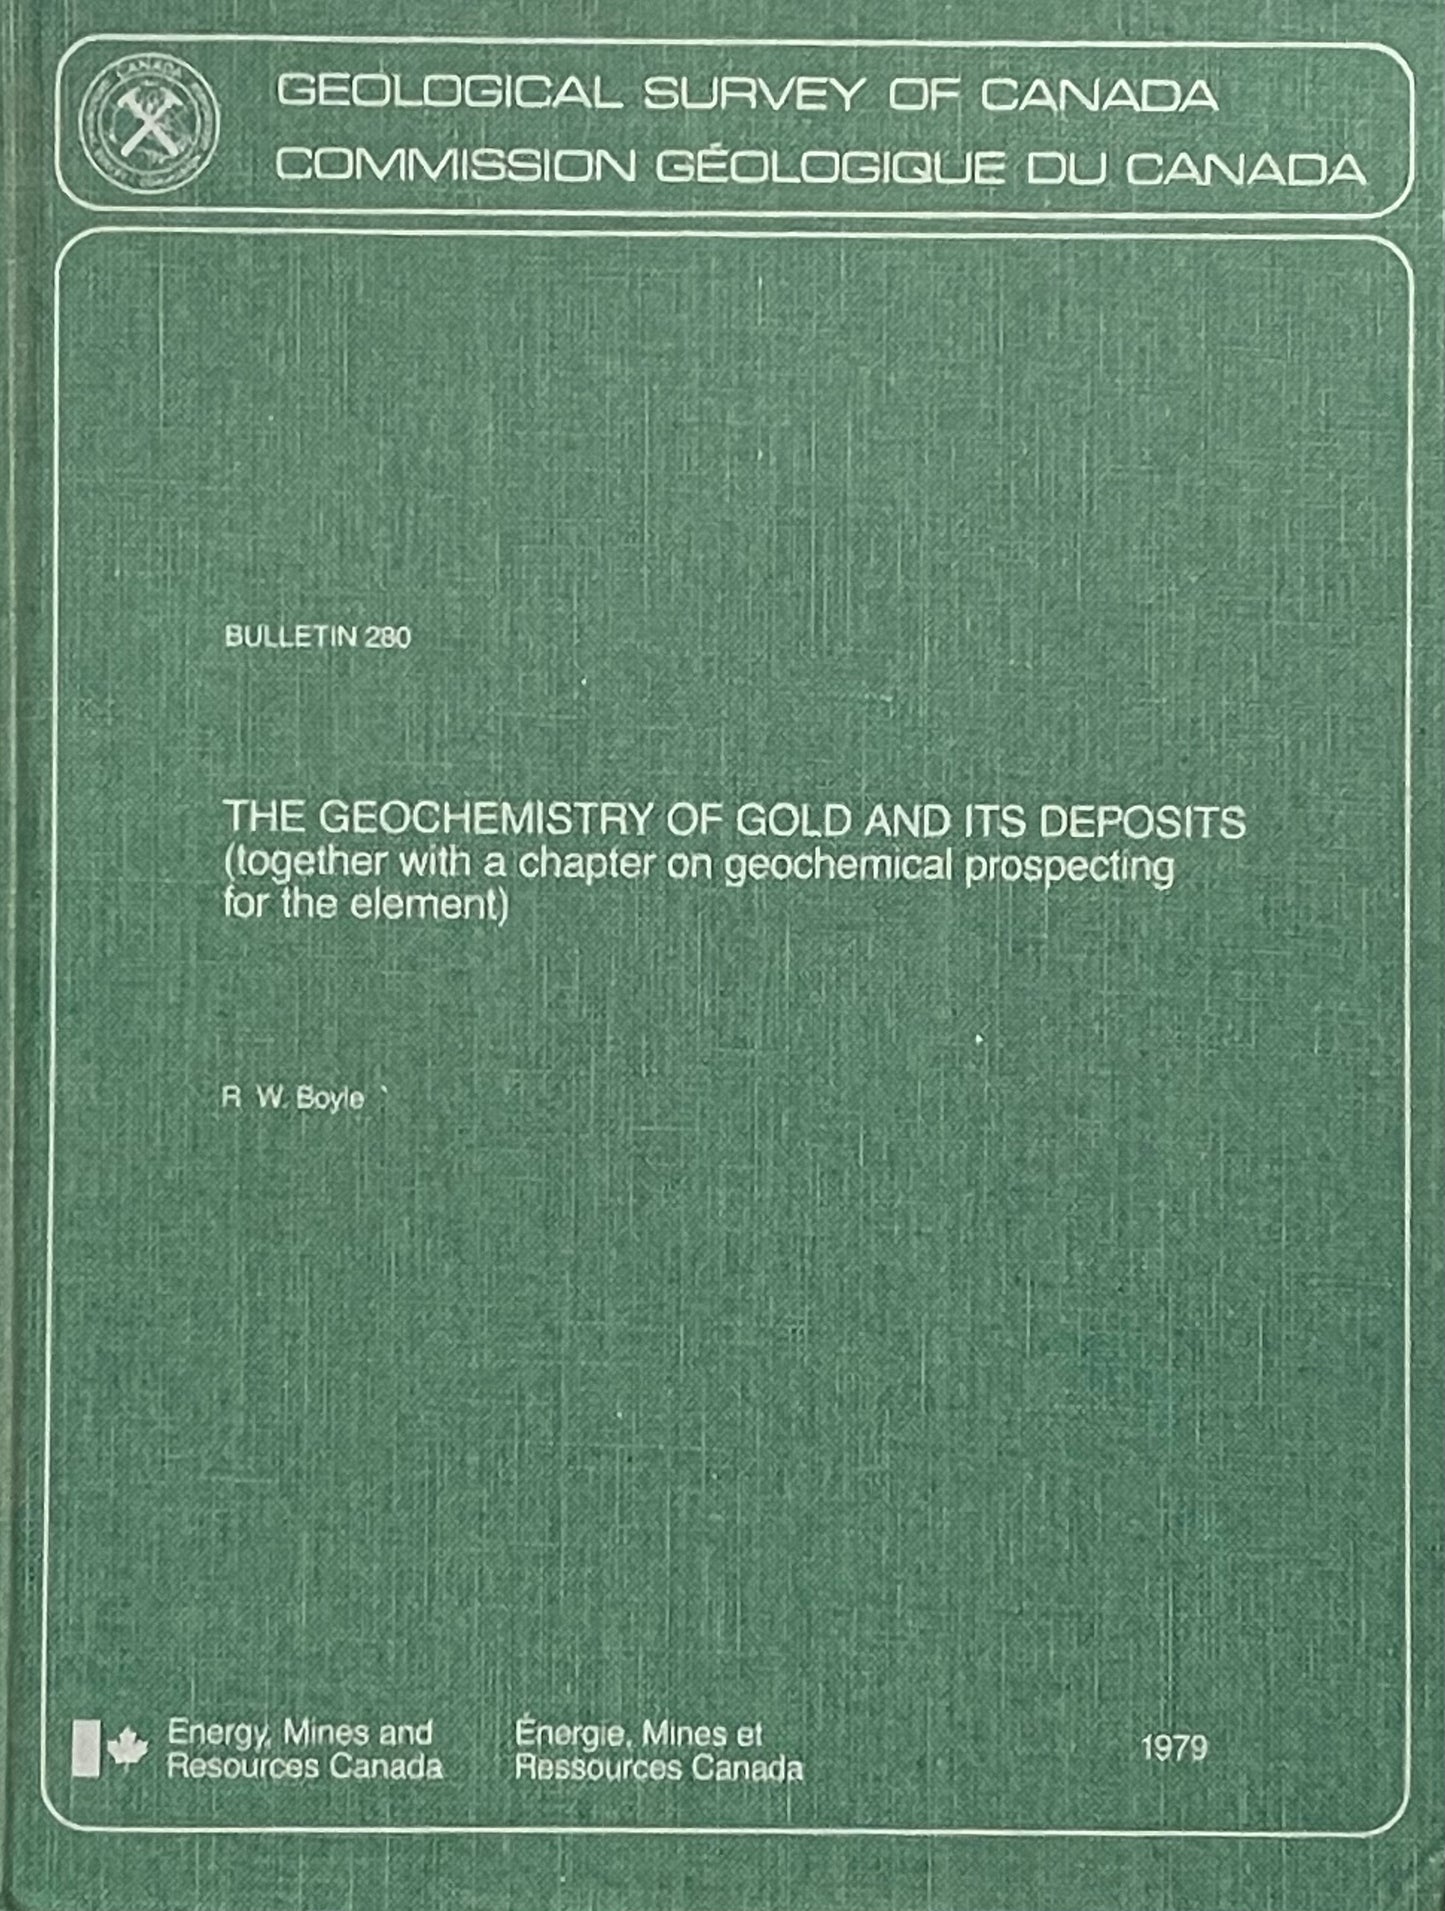 The Geochemistry of Gold and Its Deposits by R.W. Boyle Published in 1979 by Geological Survey of Canada